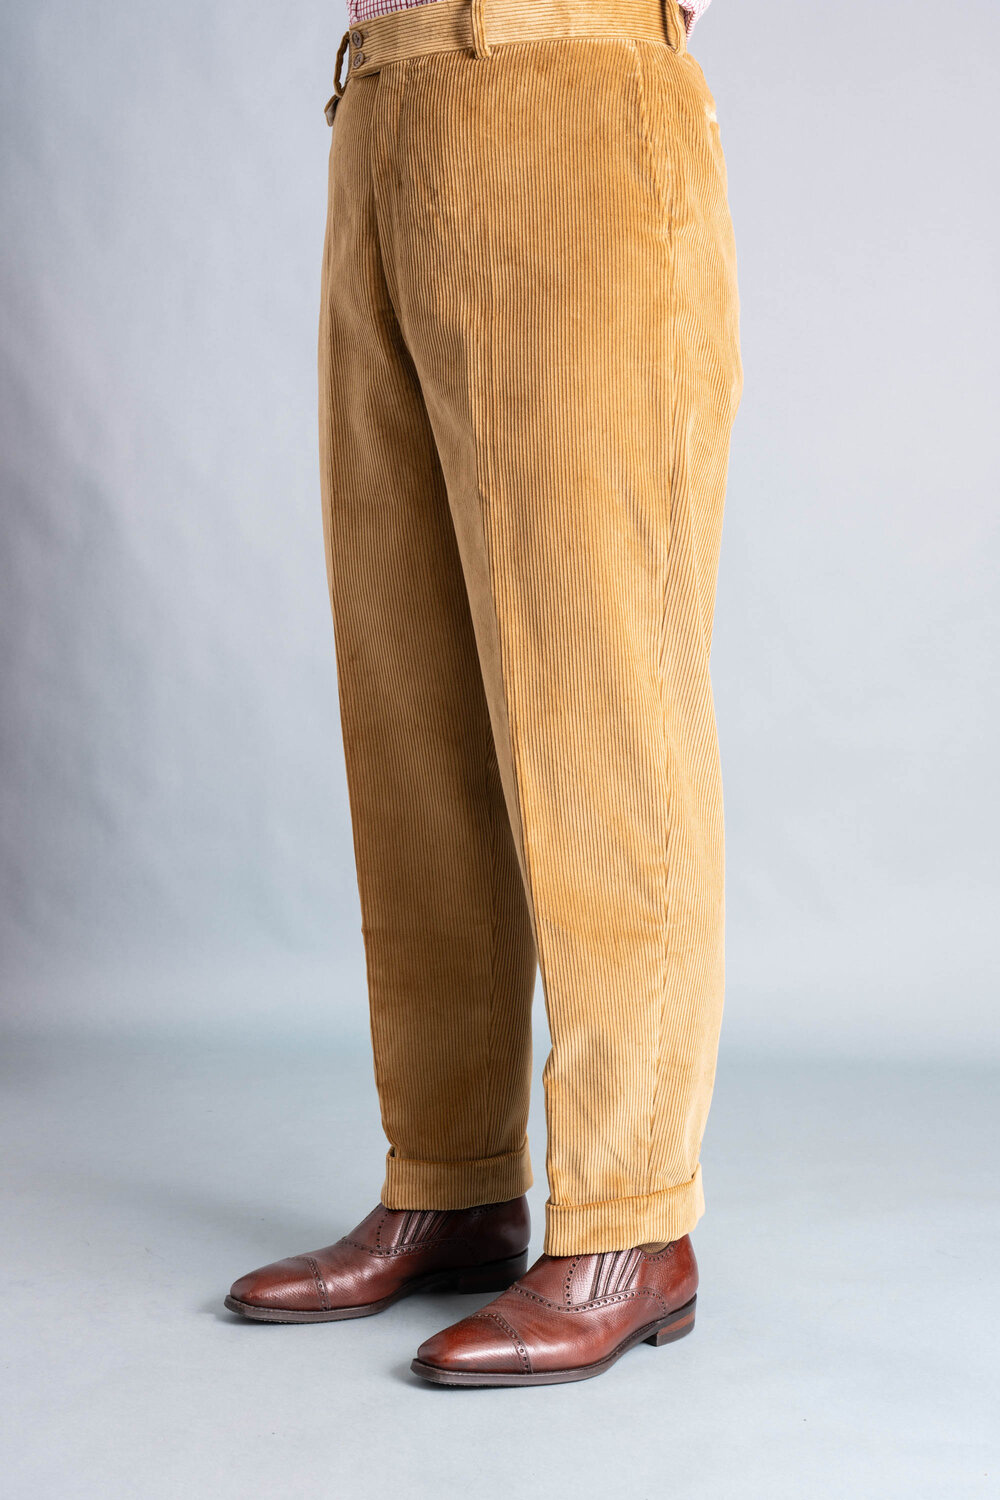 Camel Corduroy Trousers -Stancliffe Flat-Front in 8-Wale Cotton by Fort  Belvedere